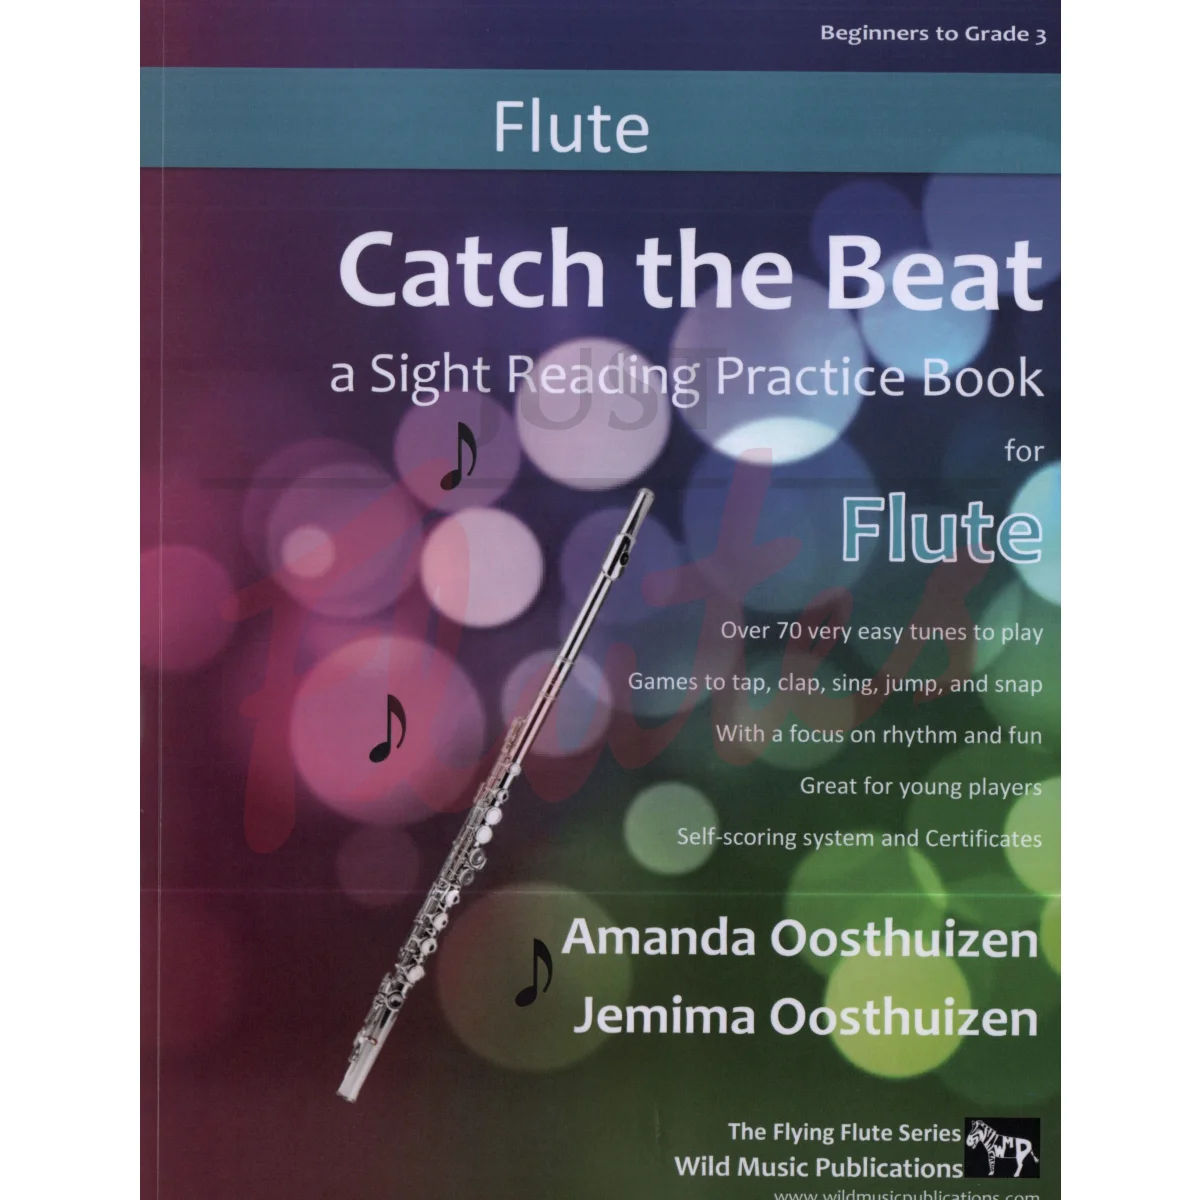 Catch the Beat: A Sight-Reading Practice Book for Flute